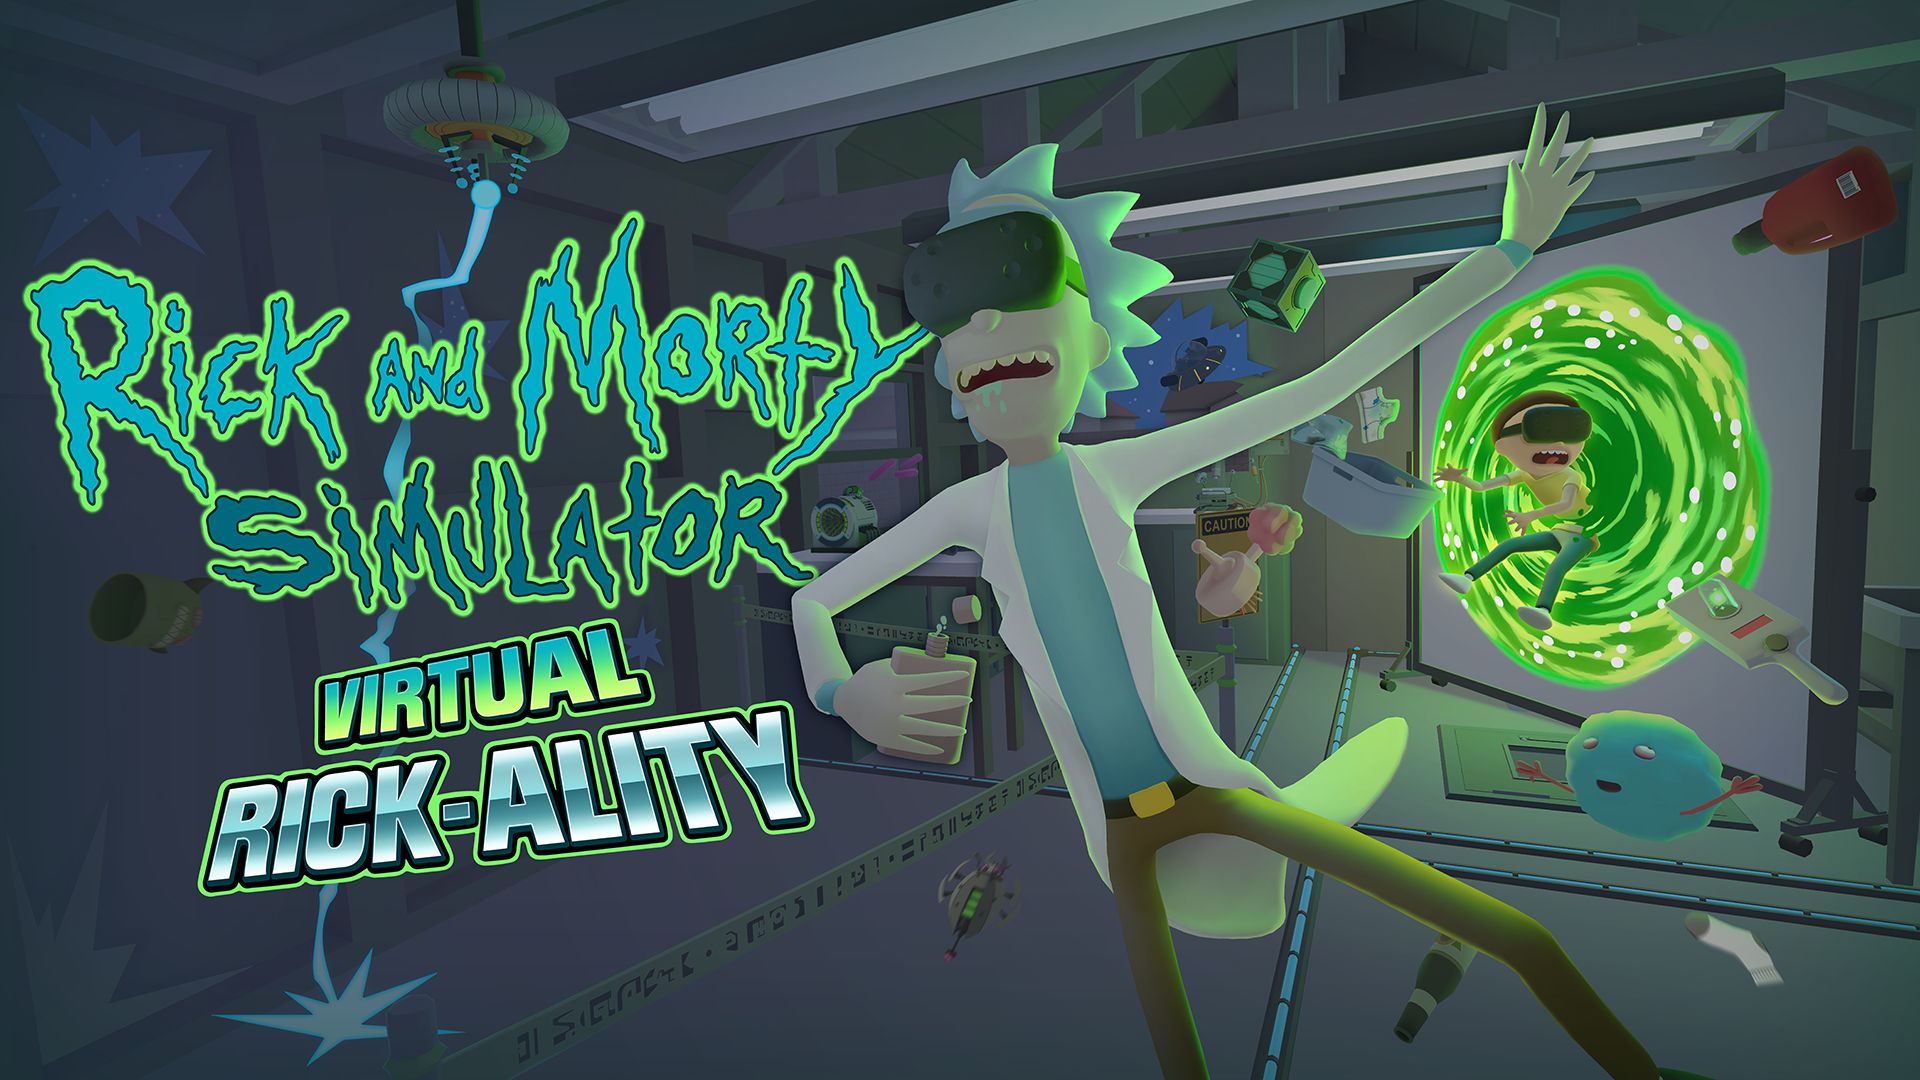 Free download wallpaper Portal, Video Game, Rick Sanchez, Morty Smith, Rick And Morty Simulator : Virtual Rick Ality, Rick And Morty: Virtual Rick Ality on your PC desktop